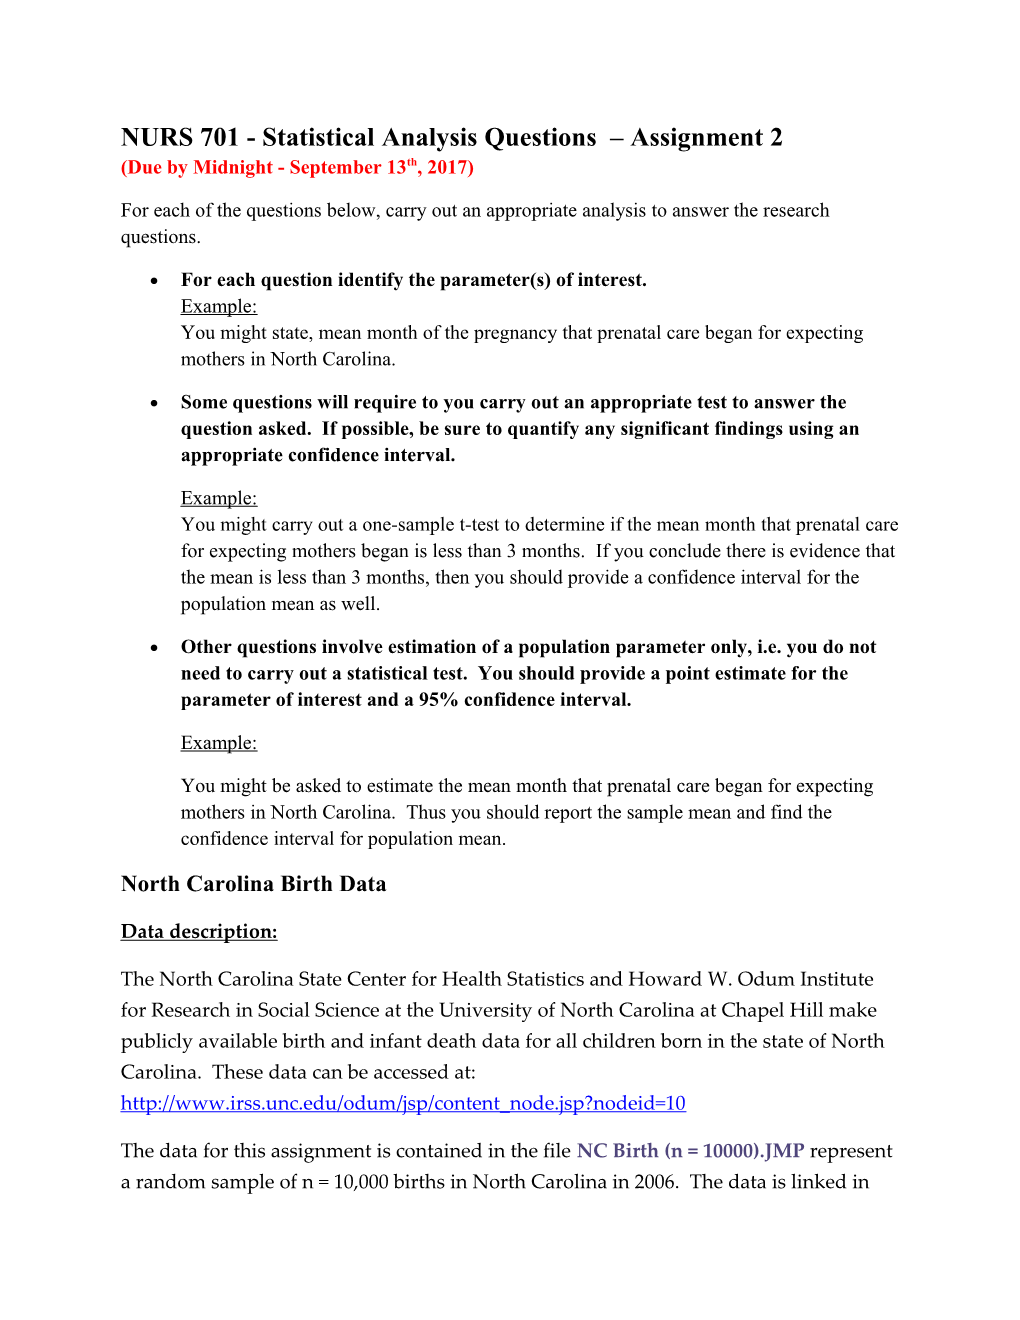 NURS 701 - Statistical Analysis Questions Assignment 2 (Due by Midnight - September 13Th